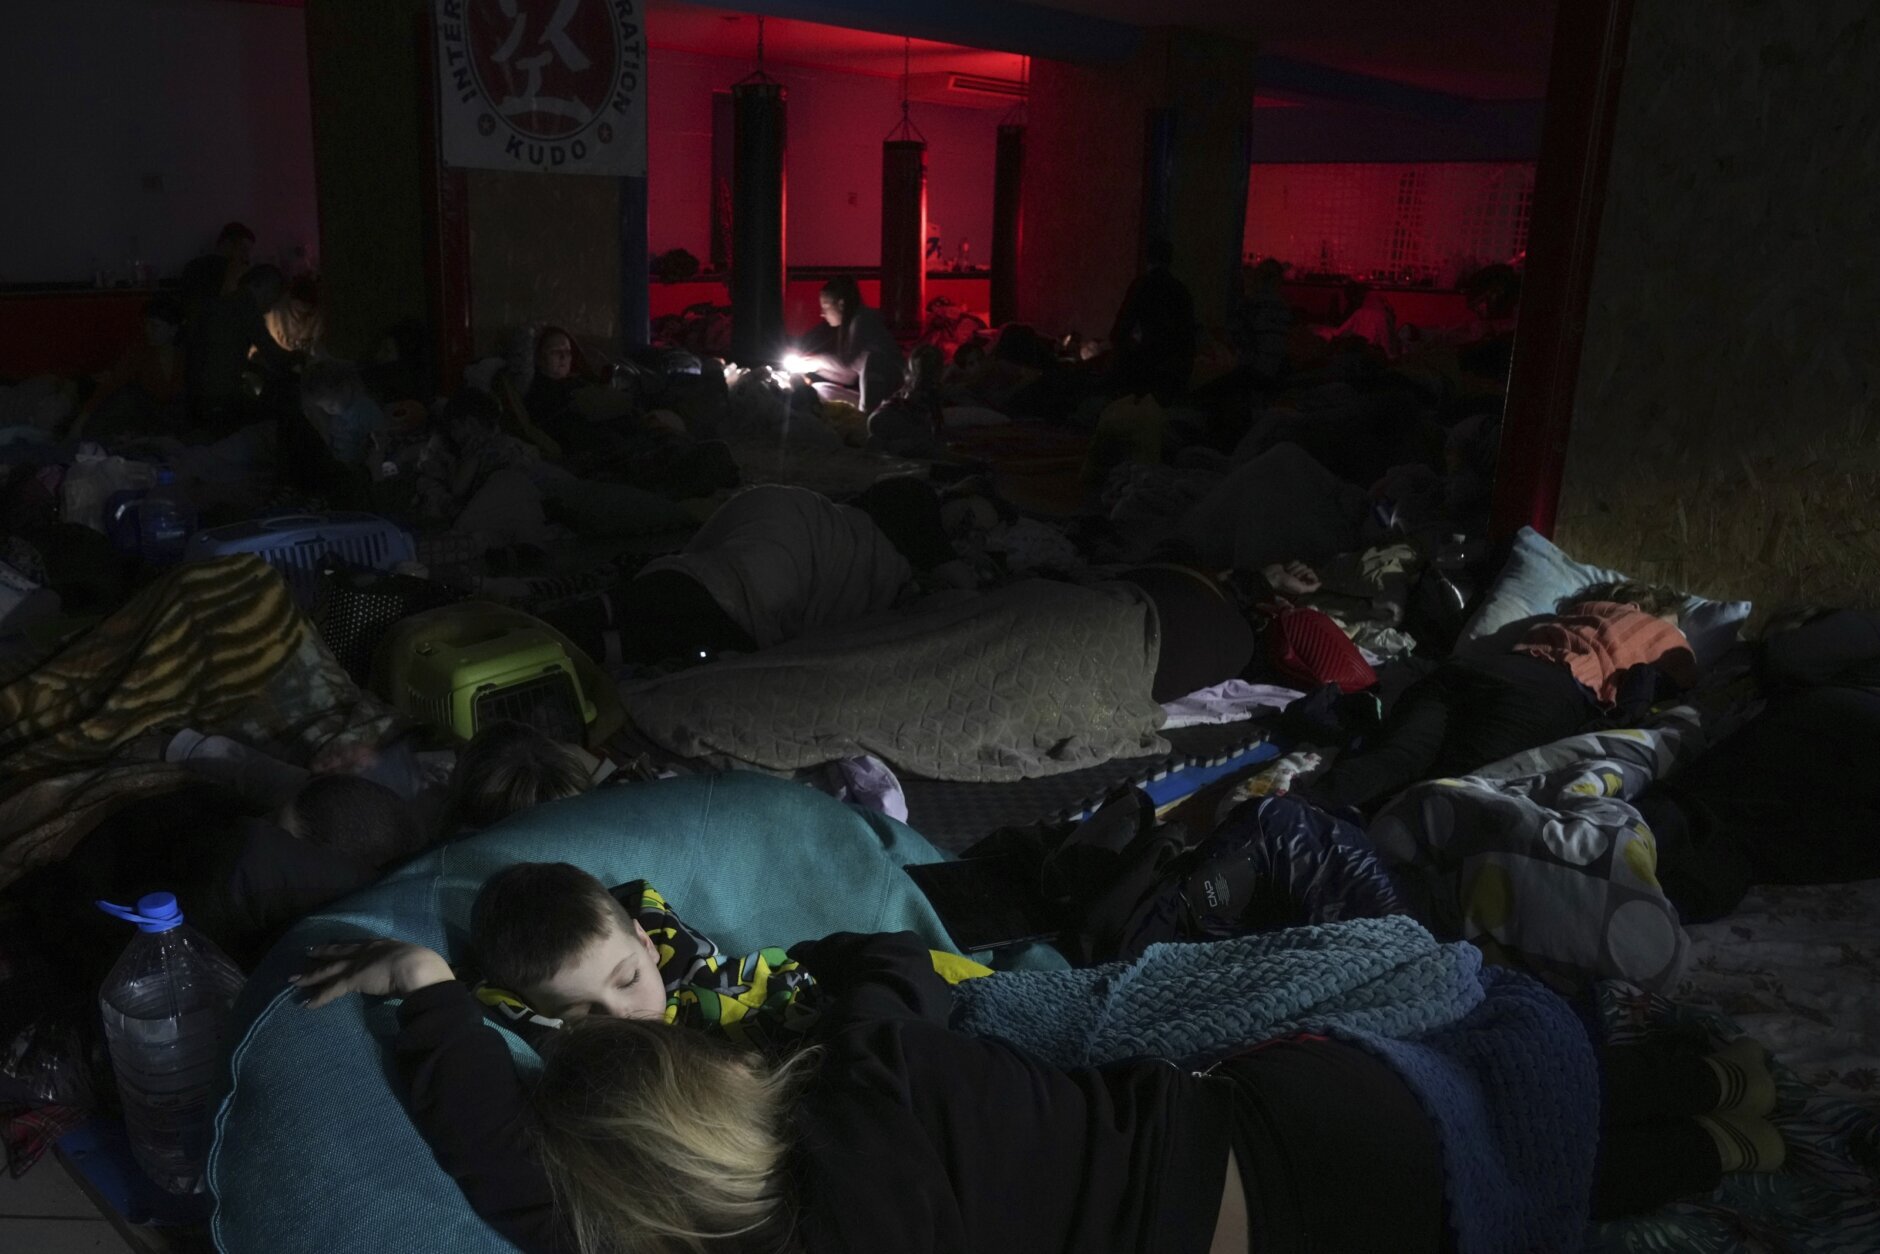 People sleep in the improvised bomb shelter in a sports center, which can accommodate up to 2000 people, in Mariupol, Ukraine, late Sunday, Feb. 27, 2022. (AP Photo/Evgeniy Maloletka)